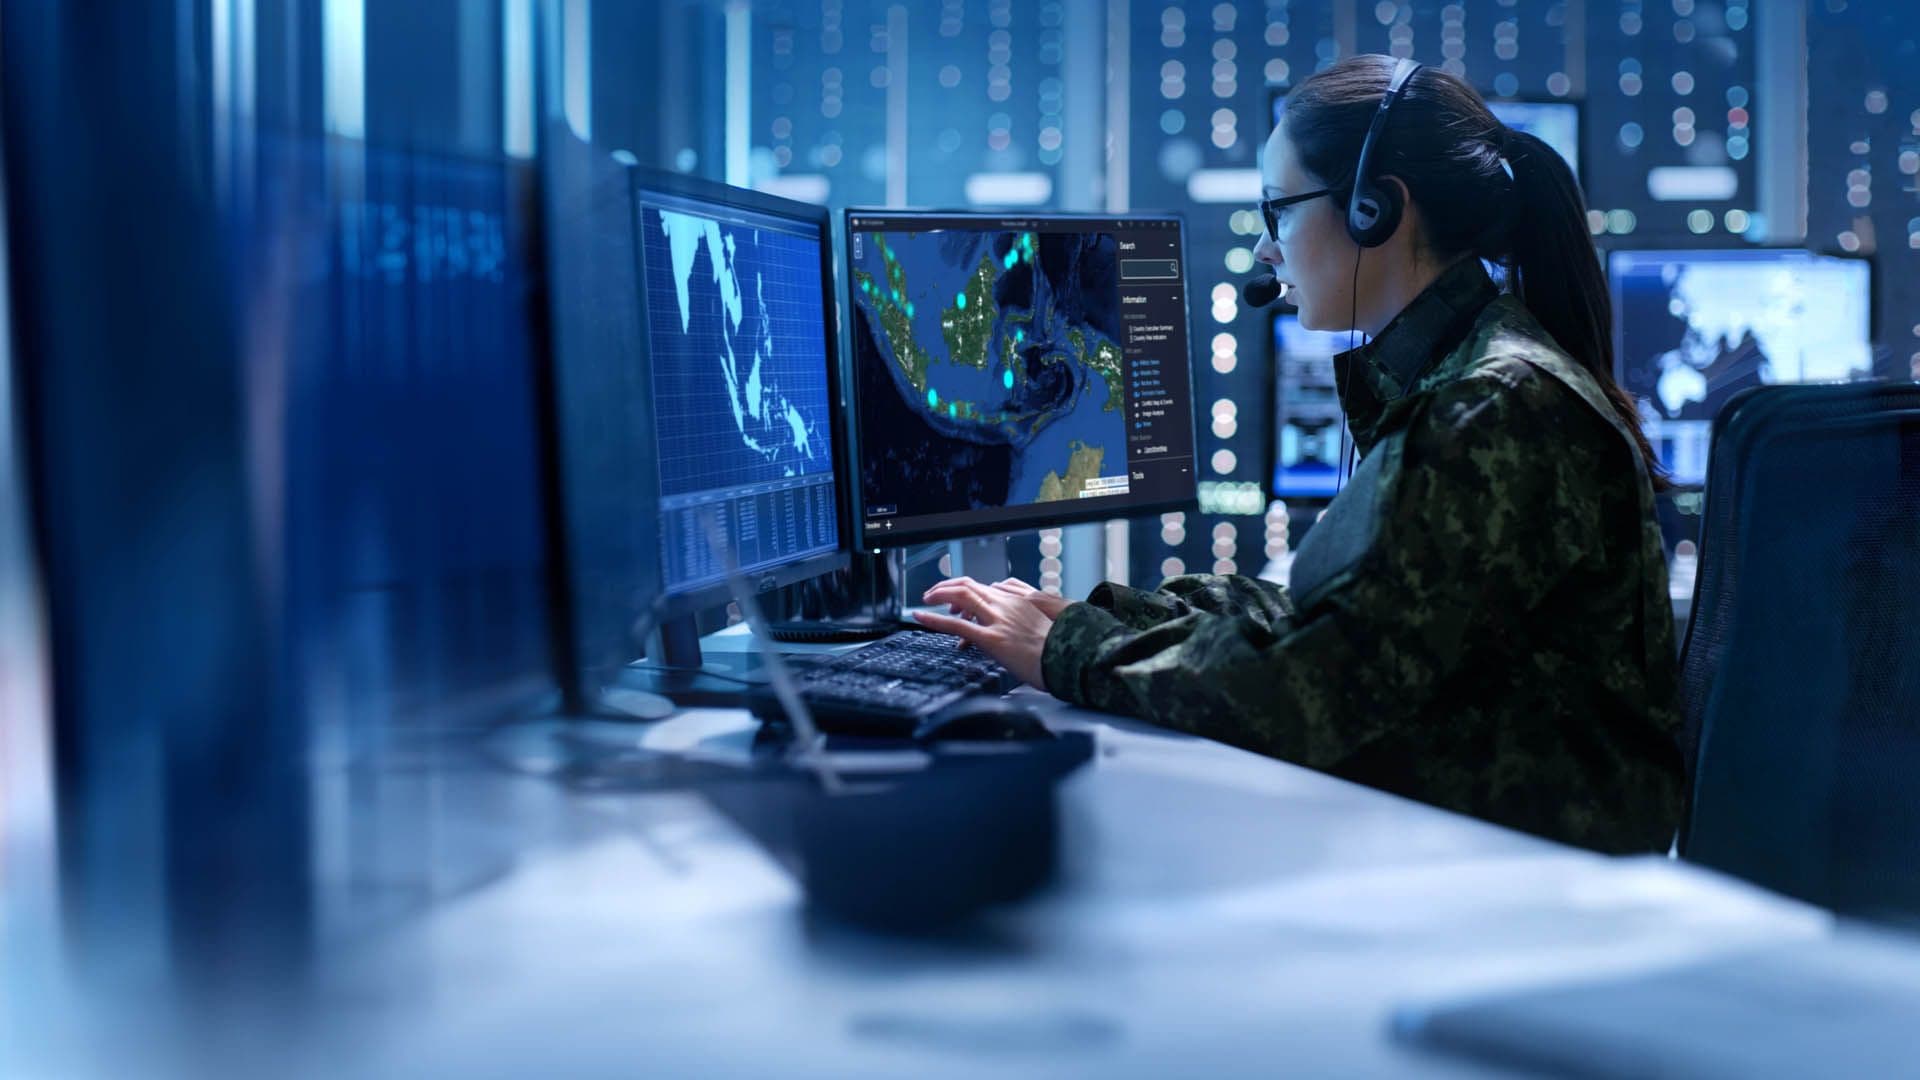 Solutions for Defense application - Joint ISR solutions - Soldier working on PC